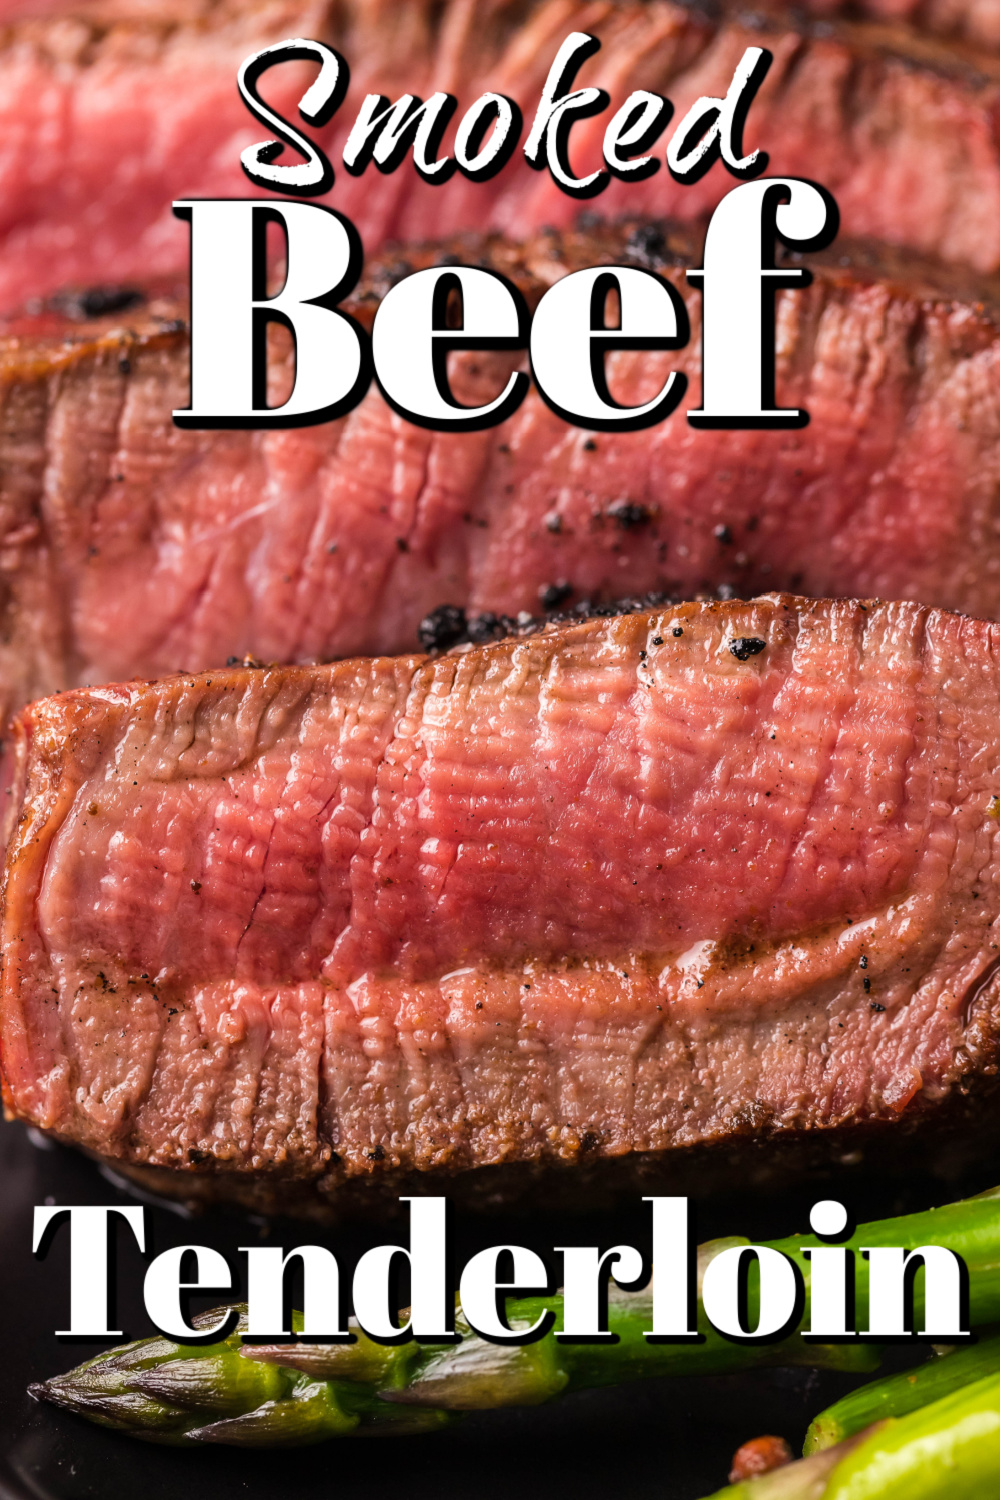 This smoked beef tenderloin filet recipe is the perfect way to serve your beef; whether it be to family or friends, everyone is going to love this amazing smoked beef!